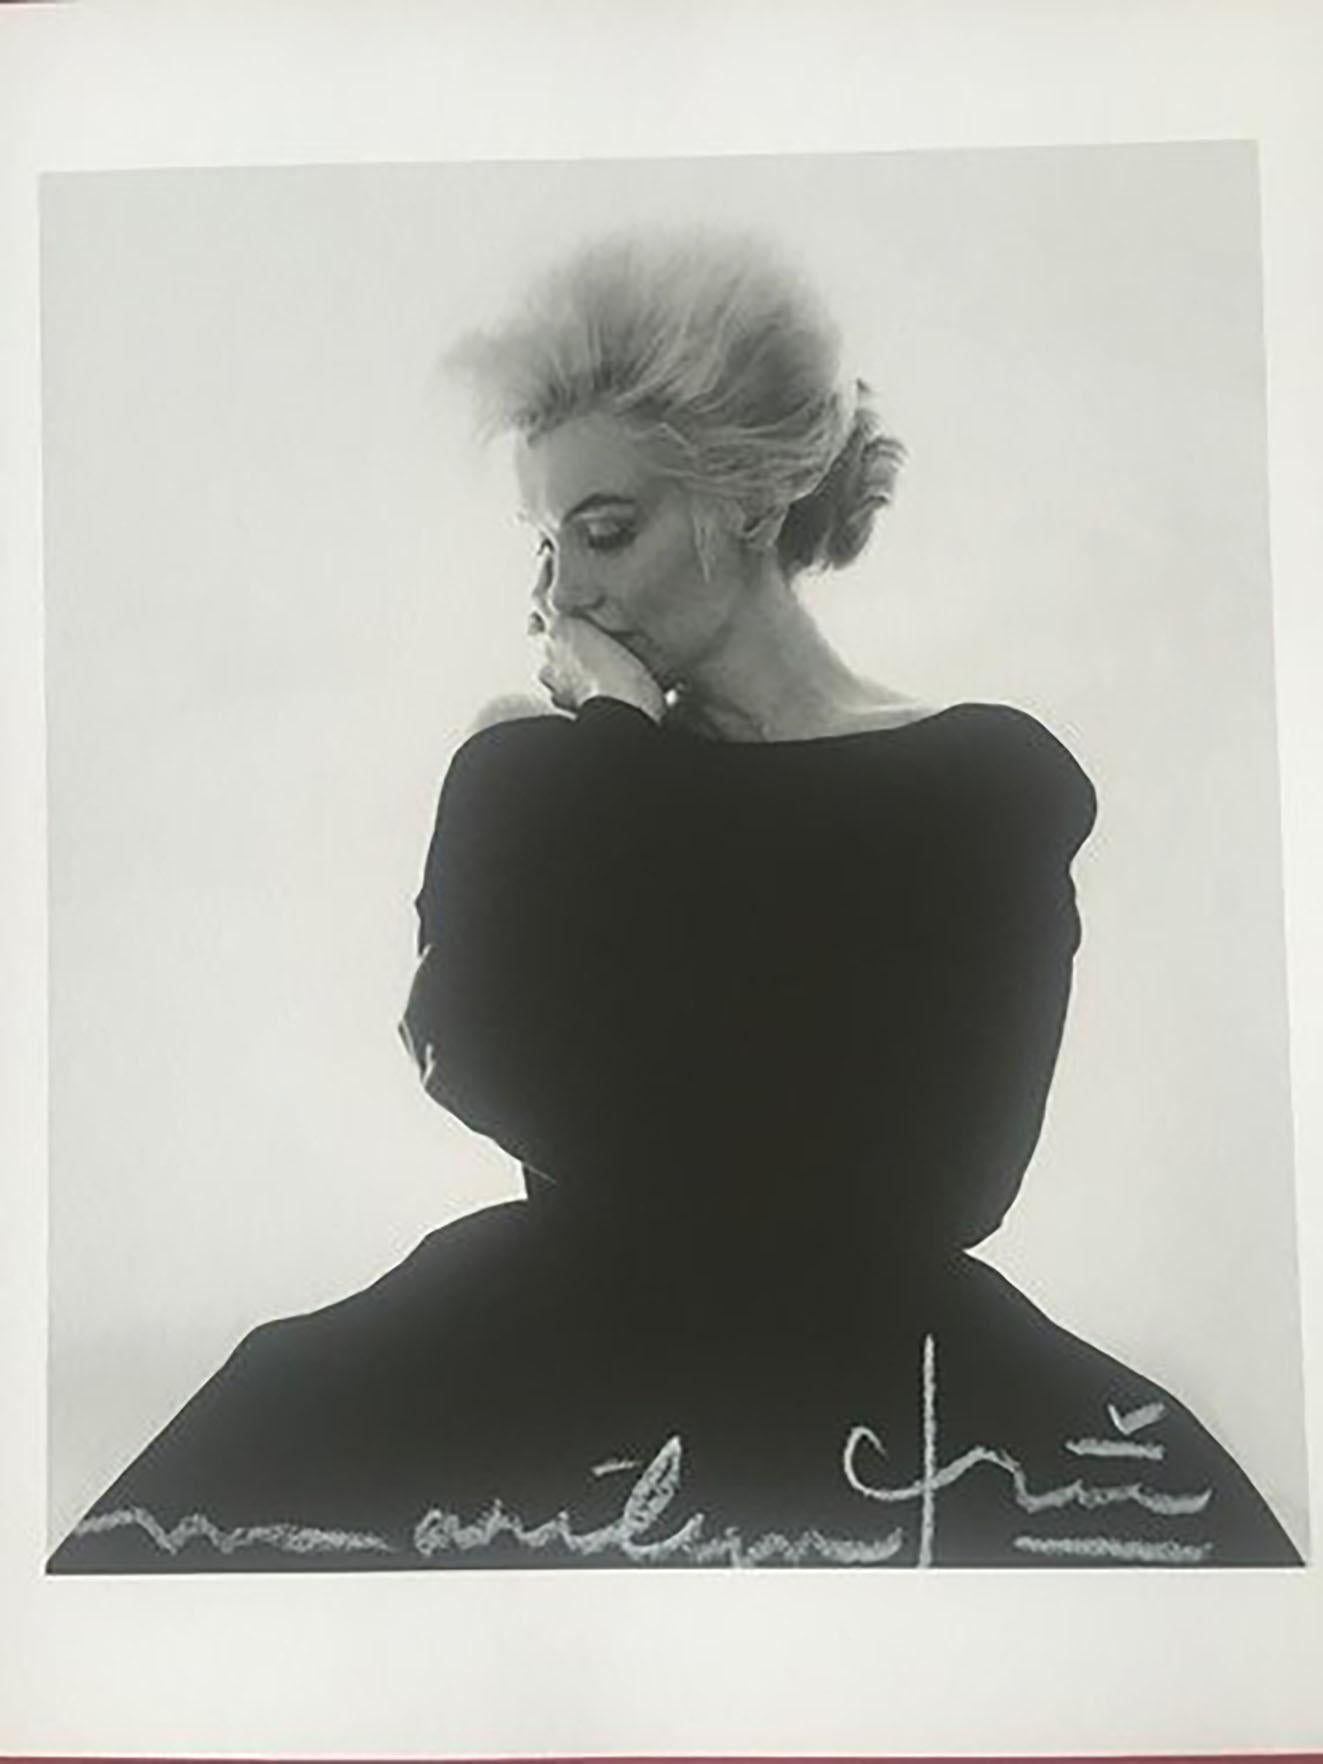 Exceptional photo of Marilyn in her Dior black dress during her last session for Vogue magazine.
Photographed by Bert Stern.
Very limited edition of 72 copies.
Signed on the front and back.

The certificate of authenticity was completed by Bert